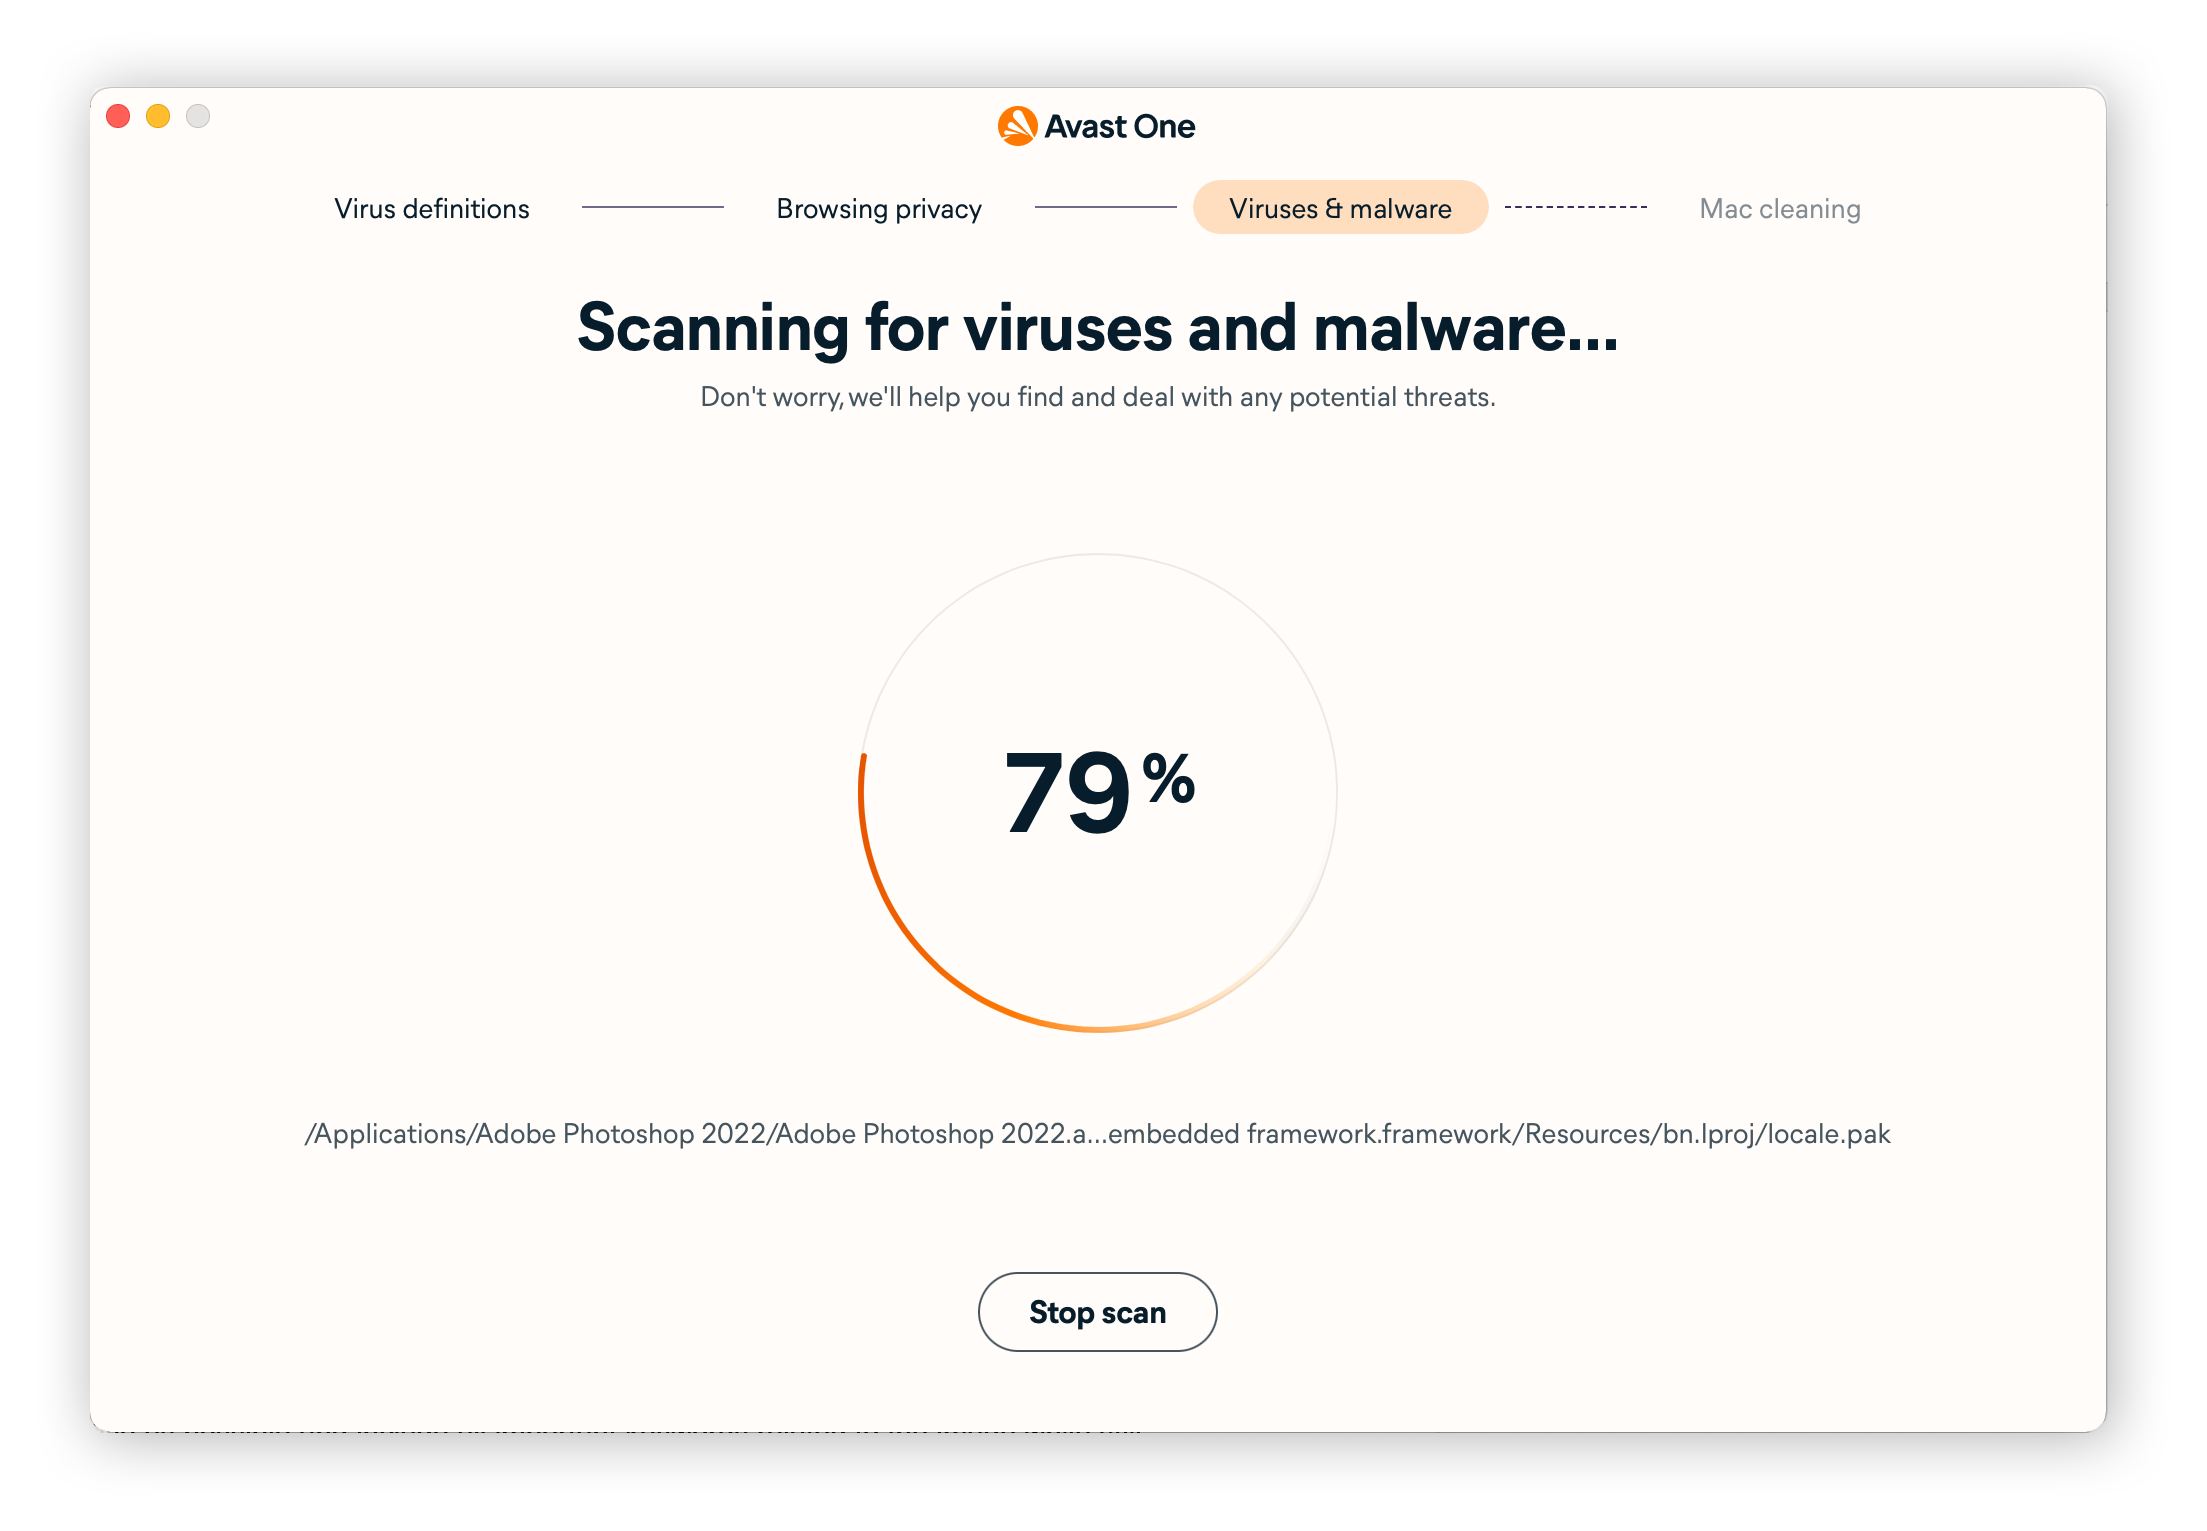 Antivirus security software will help protect your Mac against Mac viruses and other types of online threats.